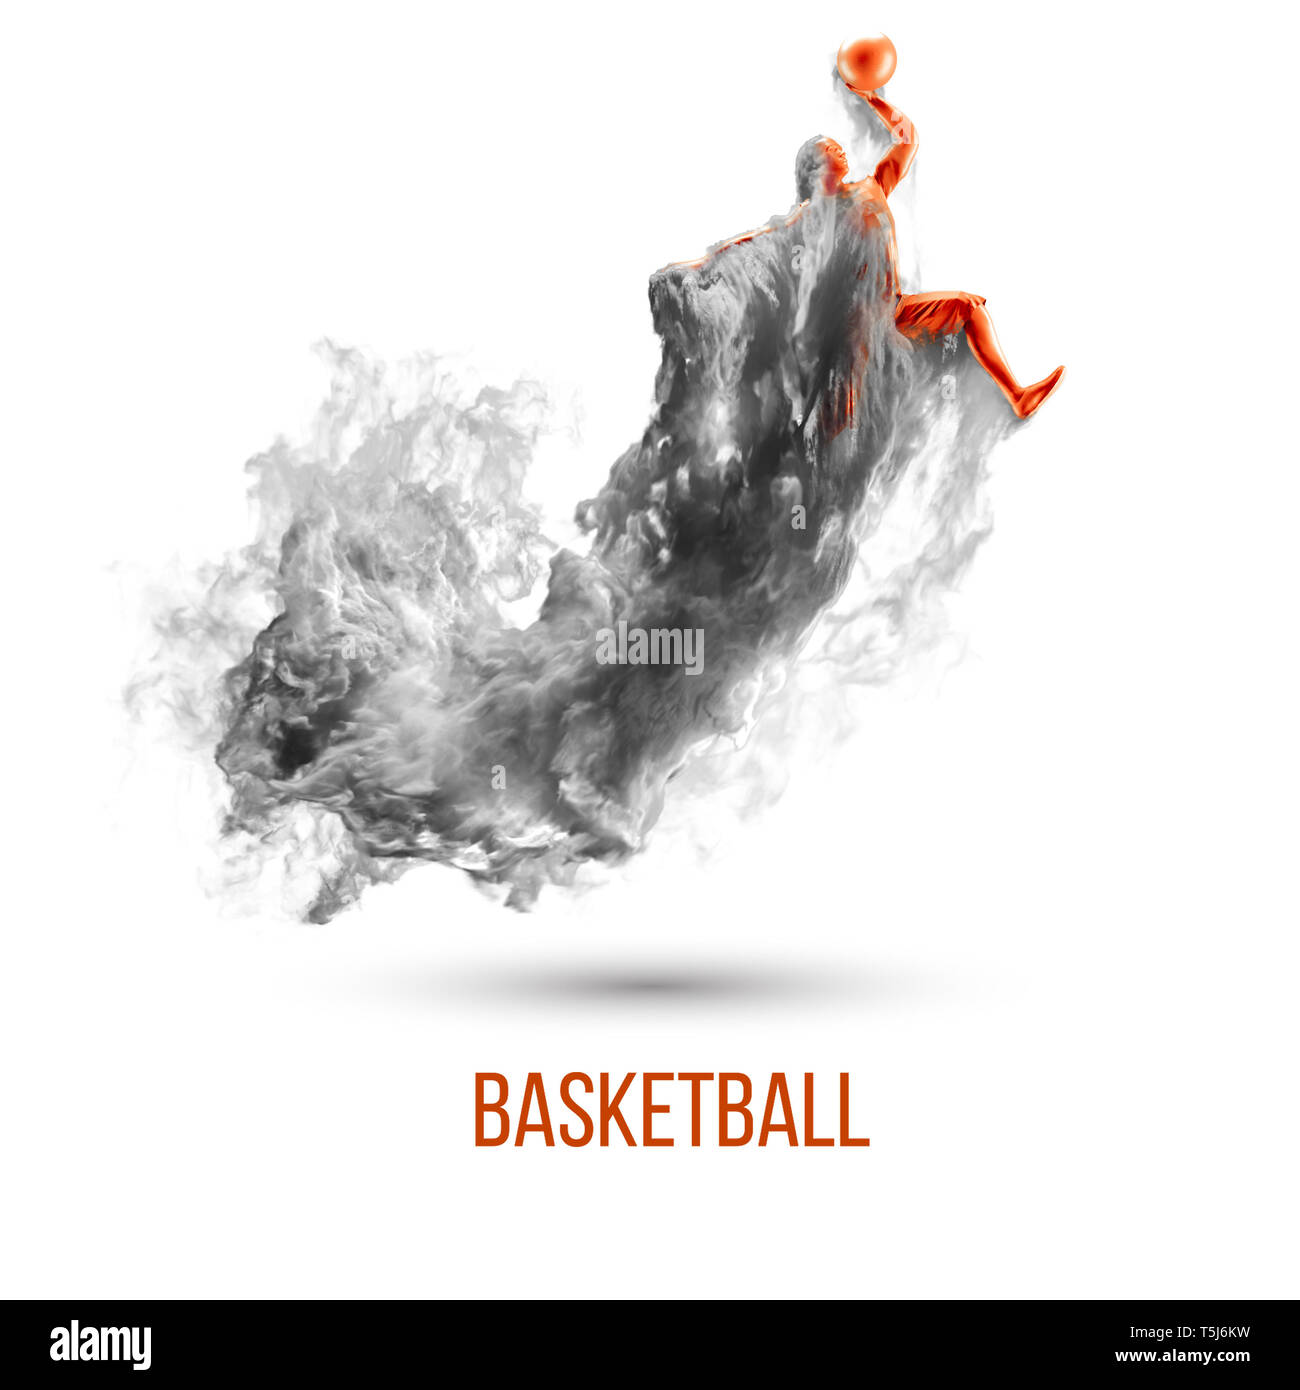 Abstract silhouette of a basketball player on white background, isolated from dust, smoke, steam. Basketball player jumping and performs slam dunk. Stock Photo